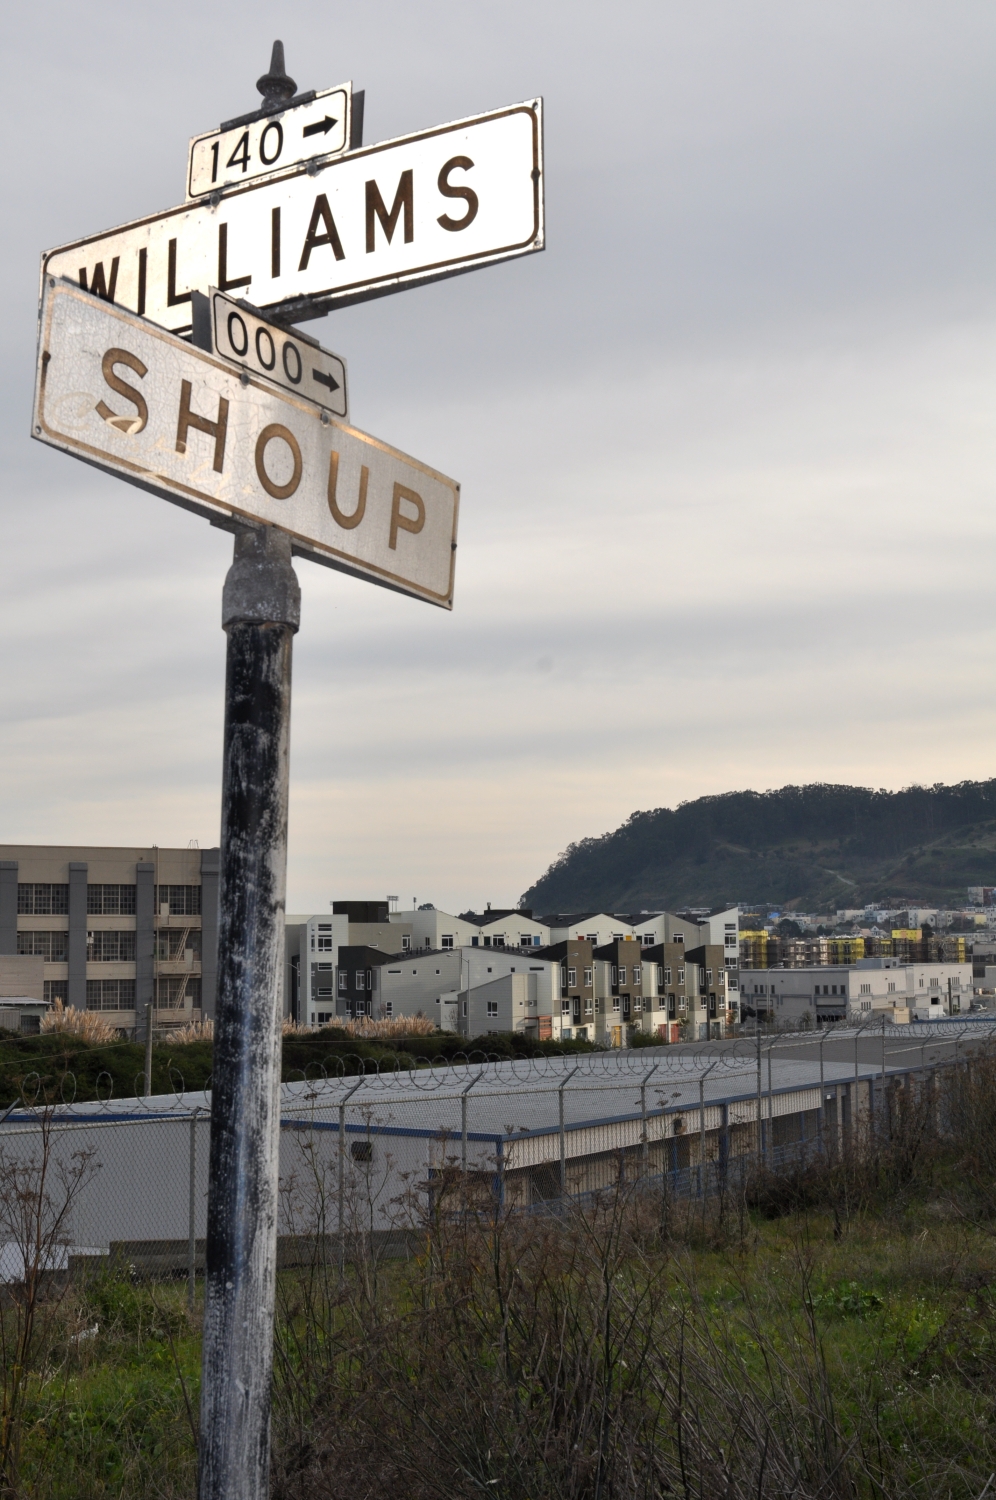 View of to street signs that say Willams and Shoup with Armstrong Place in San Francisco in the background.